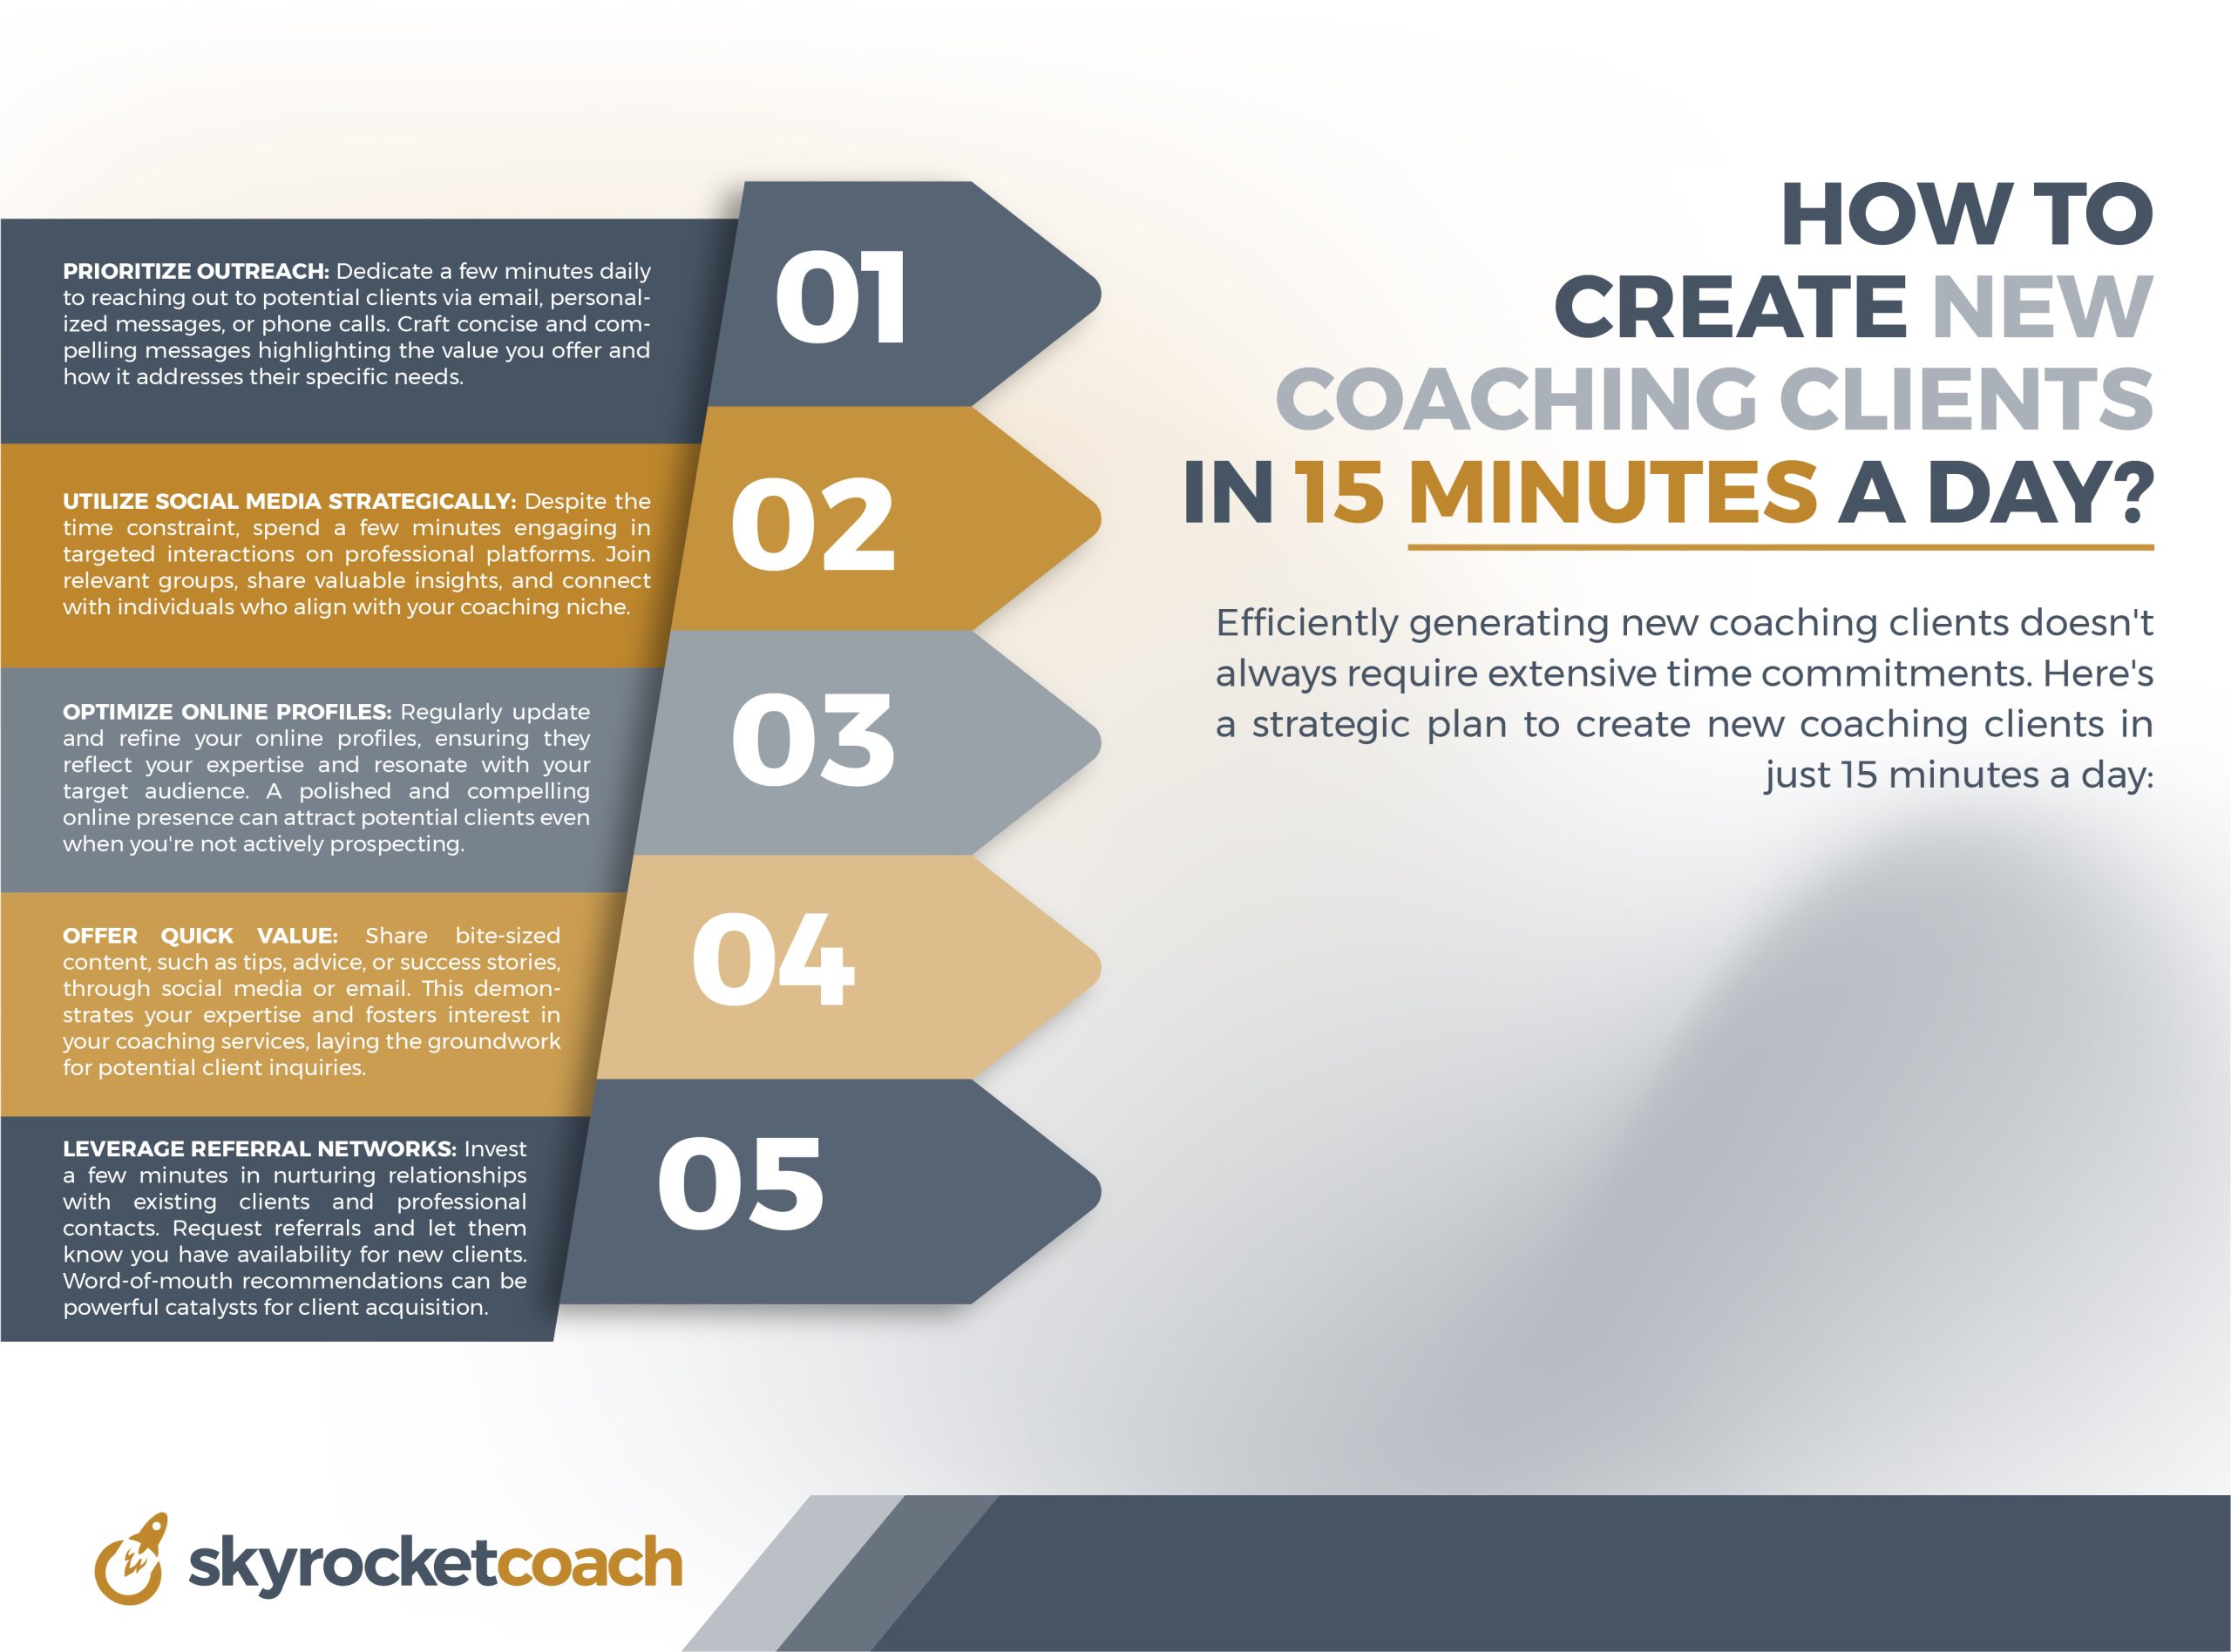 How To Create New Coaching Clients In 15 Minutes A Day